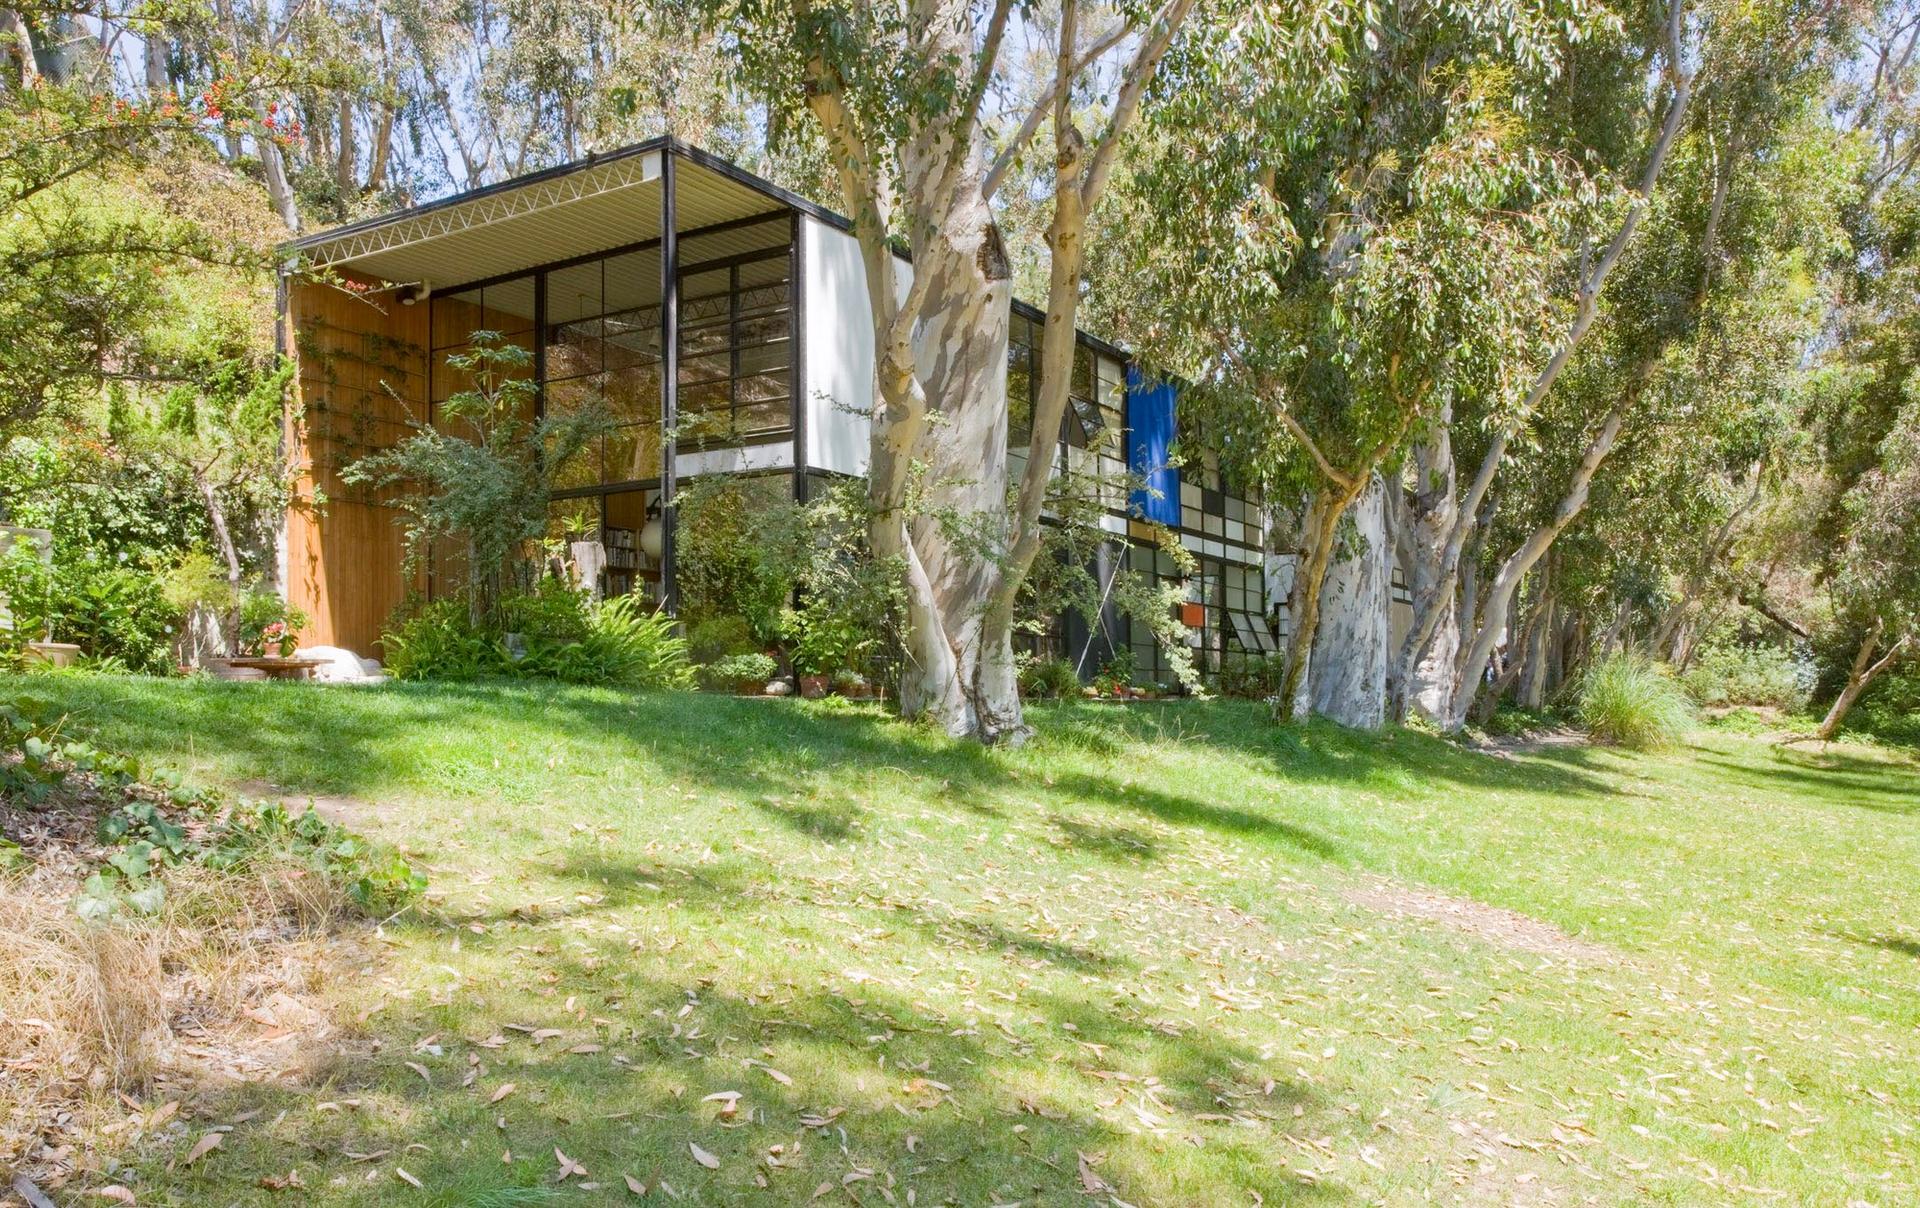 The 1949 Eames House in the Pacific Palisades section of Los Angeles Leslie Schwartz/© Eames Office